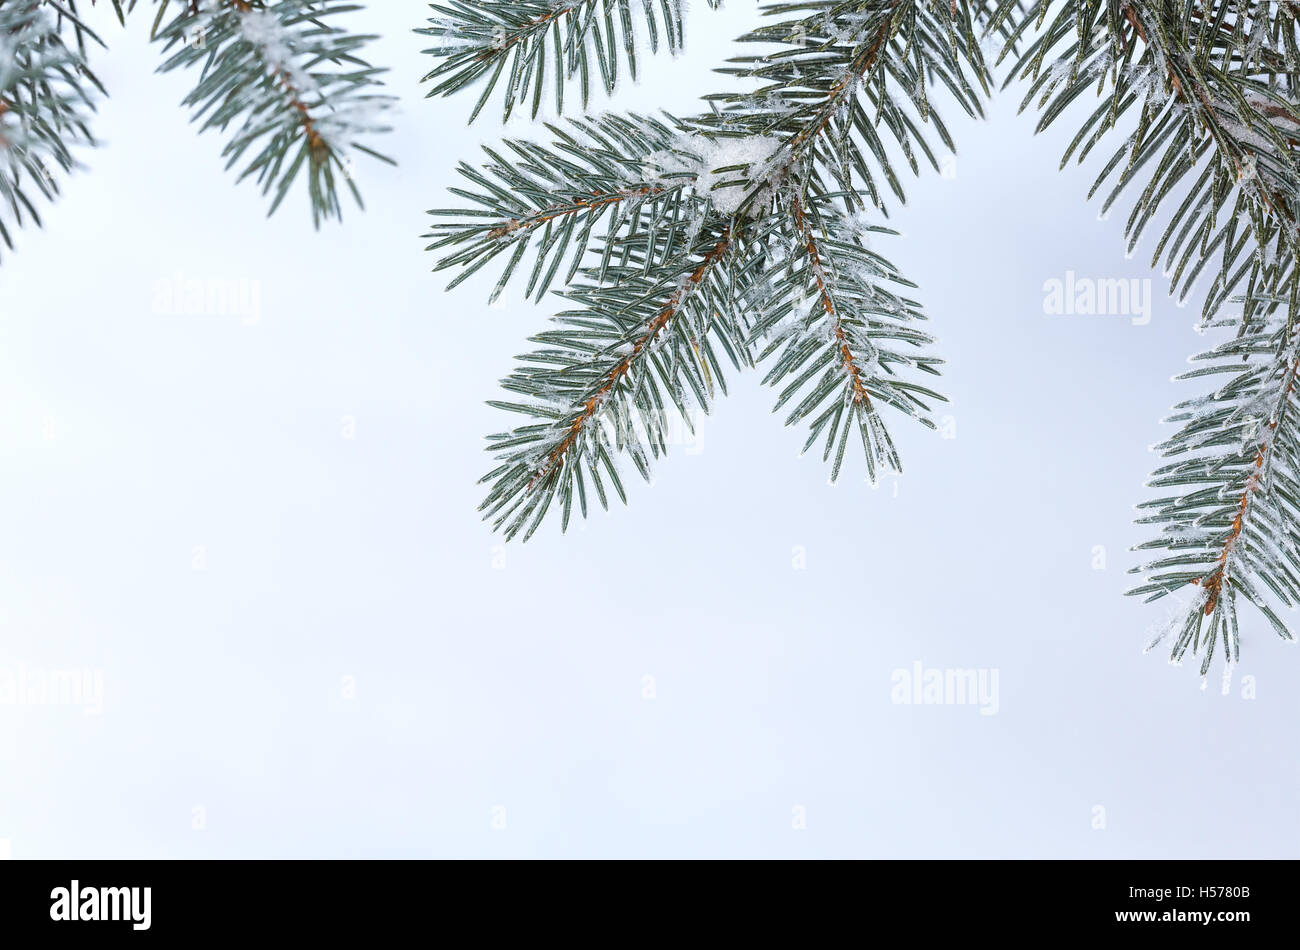 Fir tree branch covered with snow Stock Photo